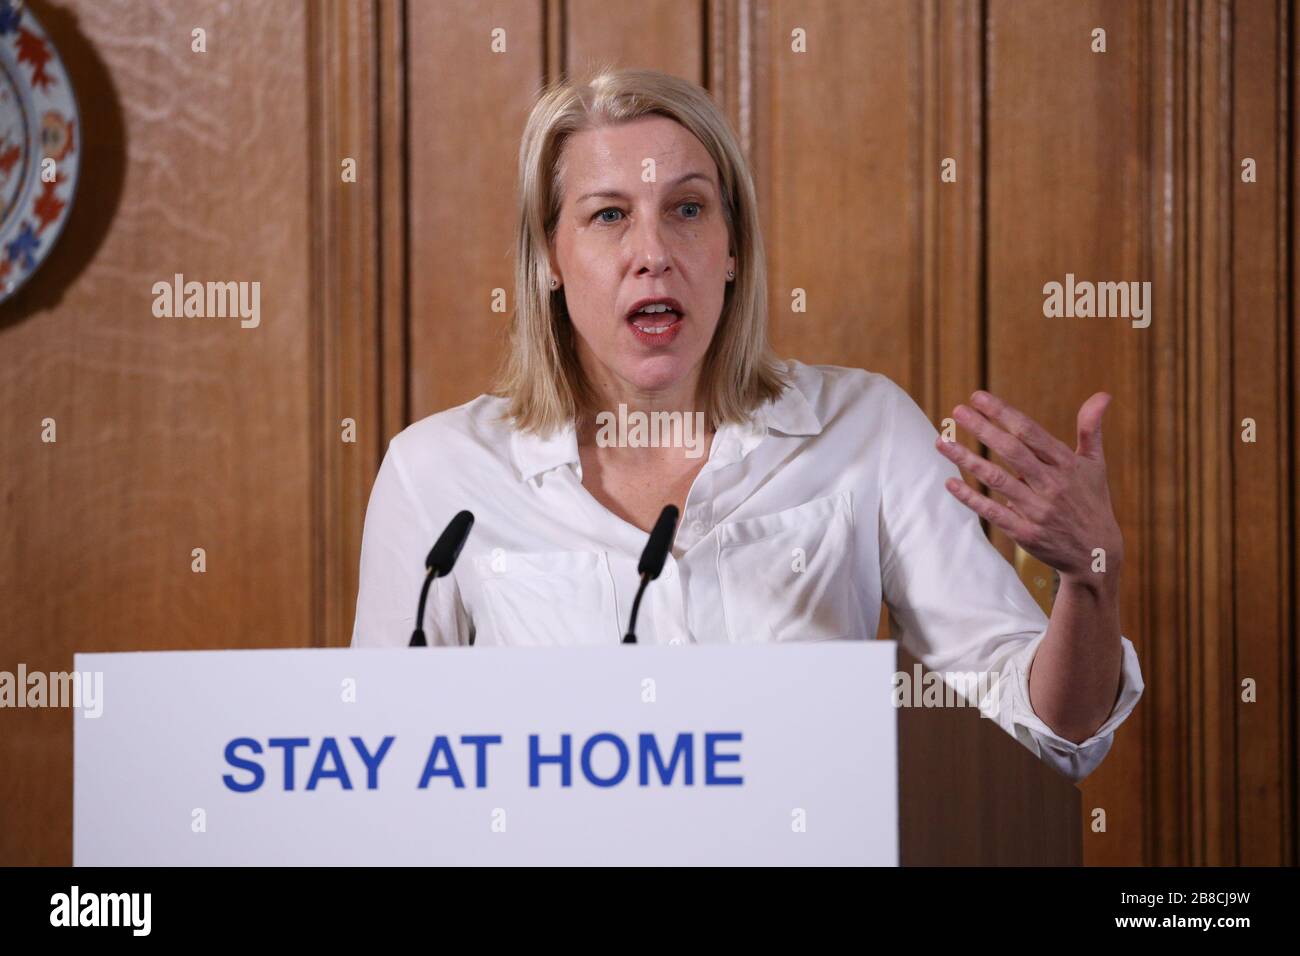 British Retail Consortium Chief Executive Helen Dickinson during the press conference at Downing Street, London giving the latest updated on the Coronavirus pandemic. Stock Photo